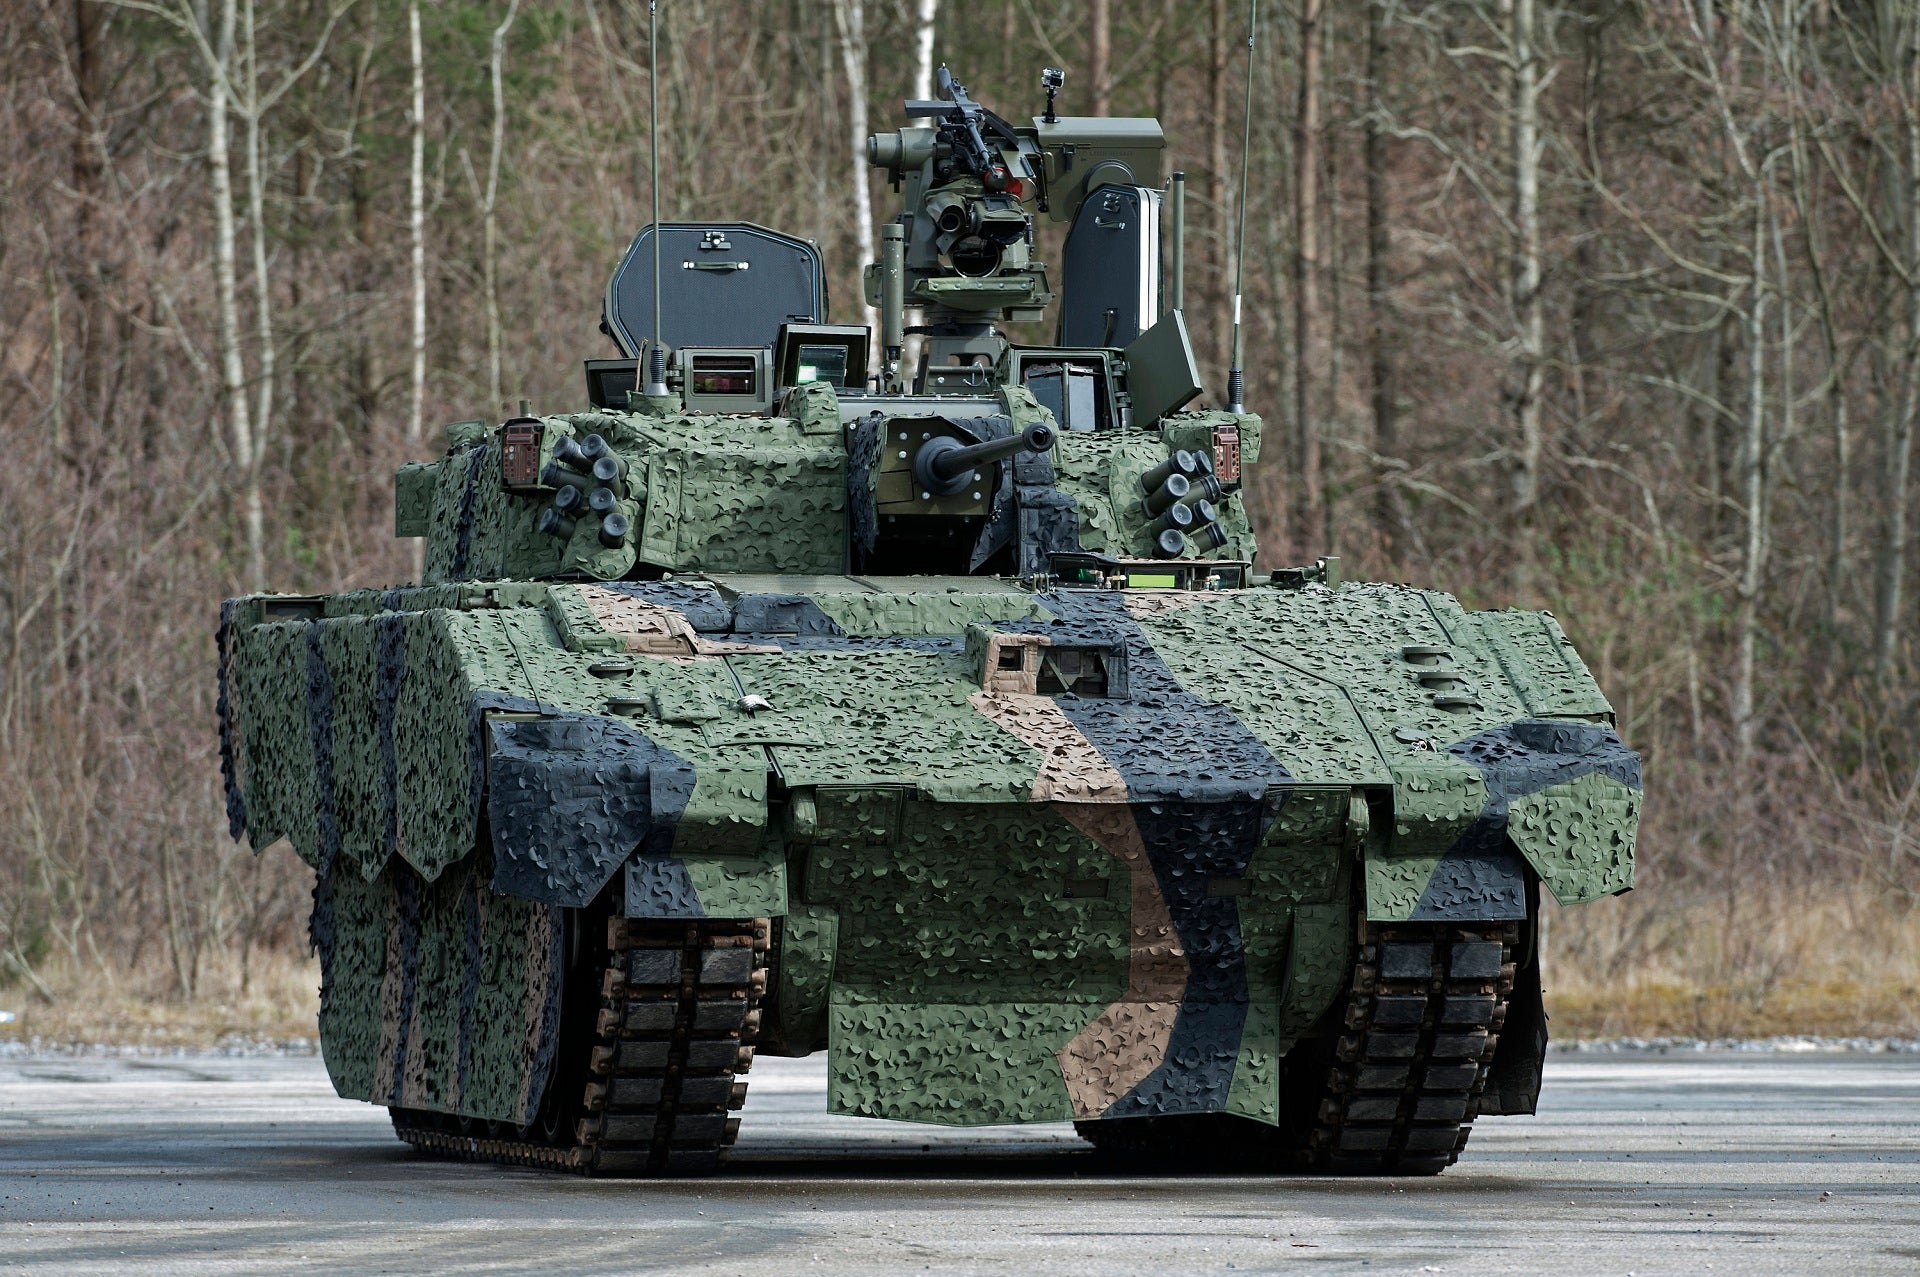 UK MoD confirms Ajax tank trials paused due to certain safety risks